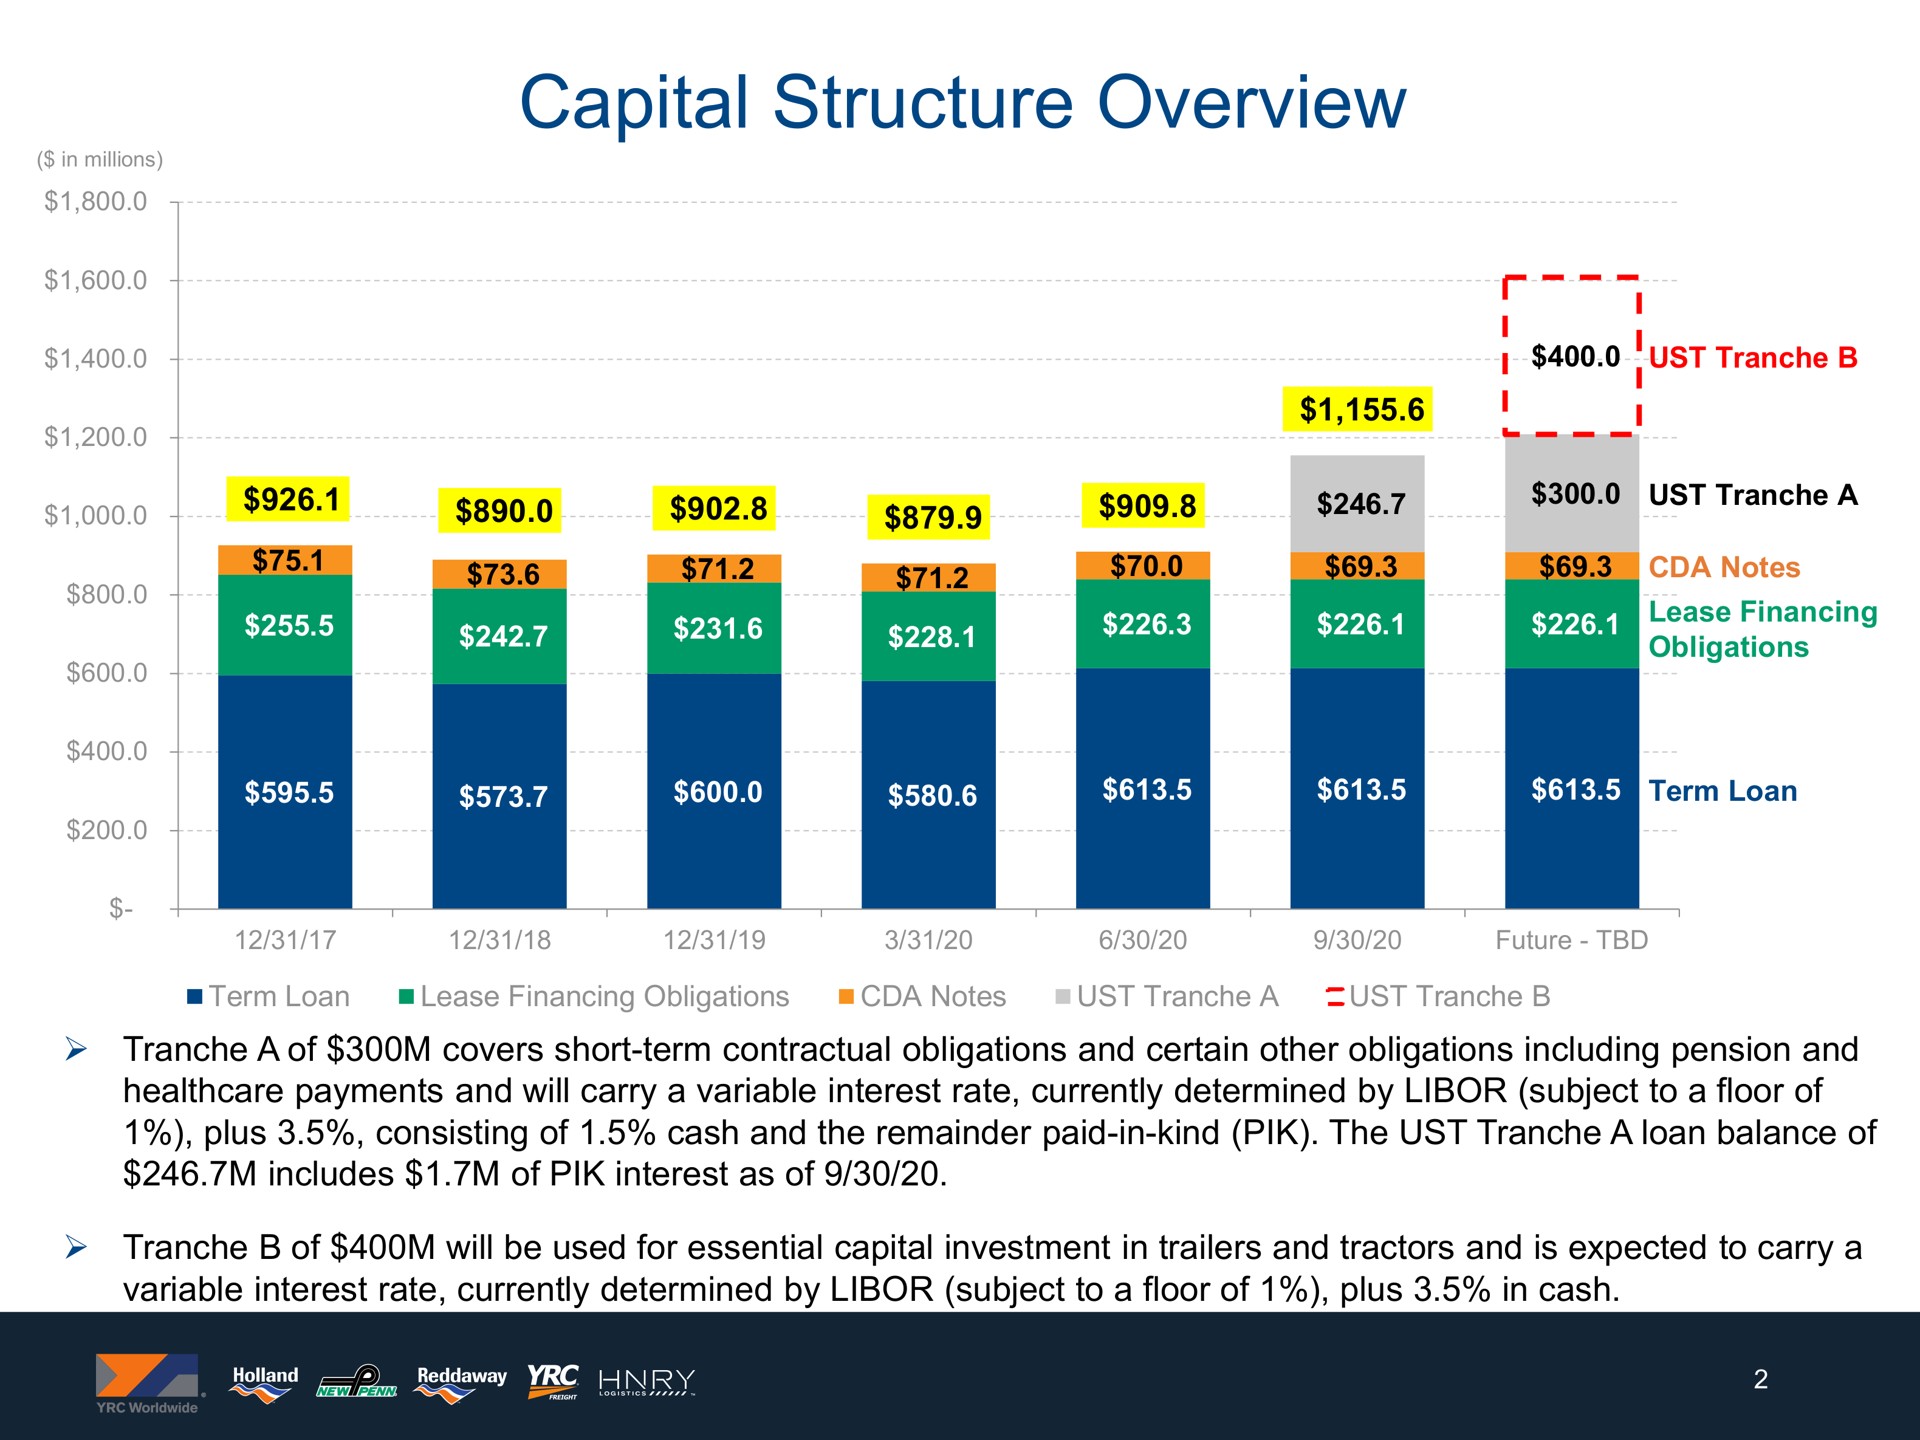 capital structure overview | Yellow Corporation